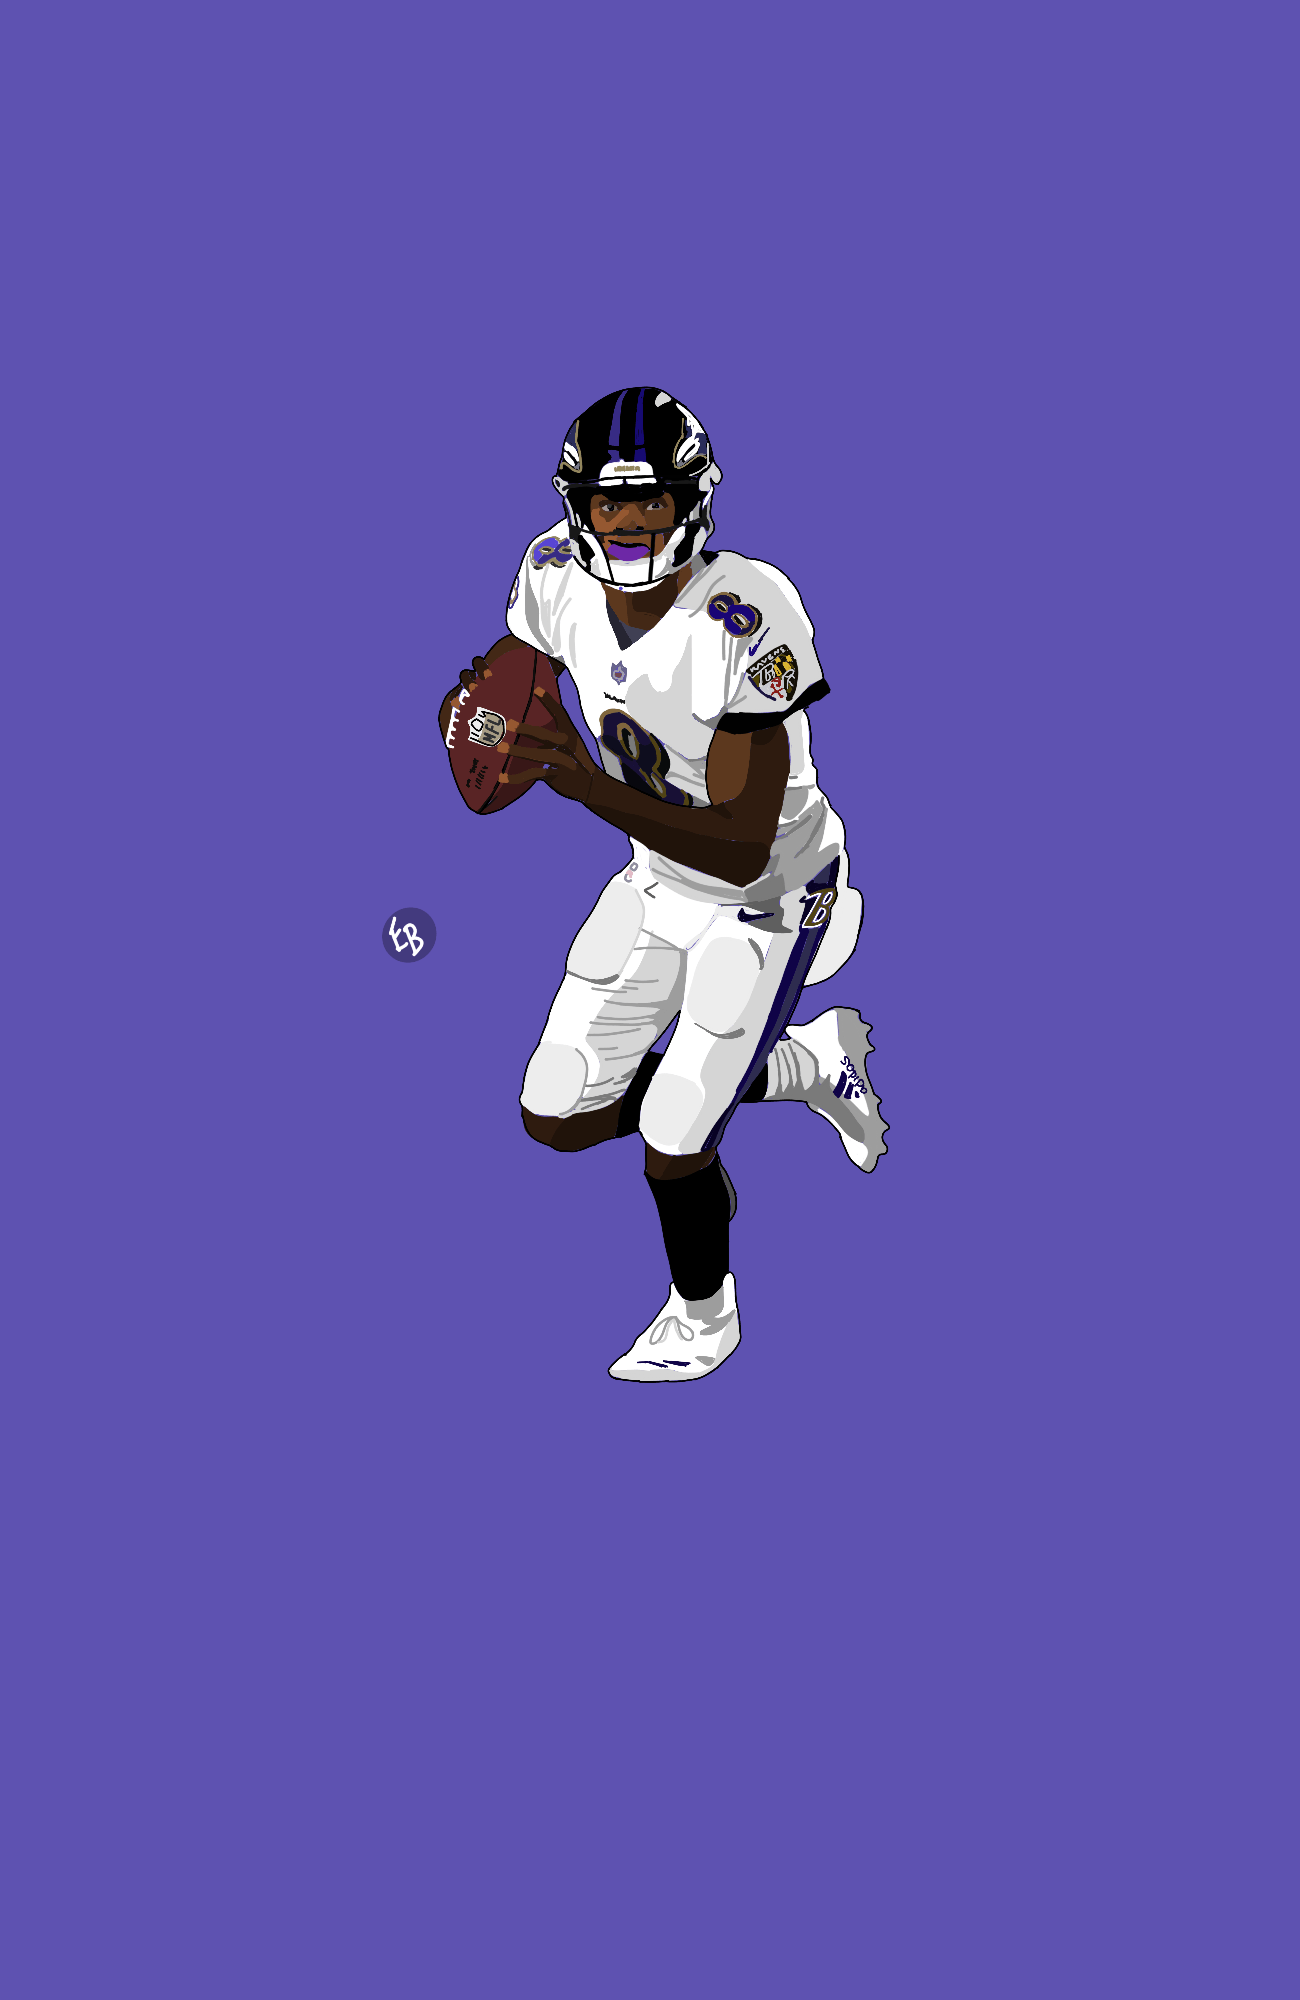 Thought You Guys Might Like This Lamar Jackson Graphic I Made